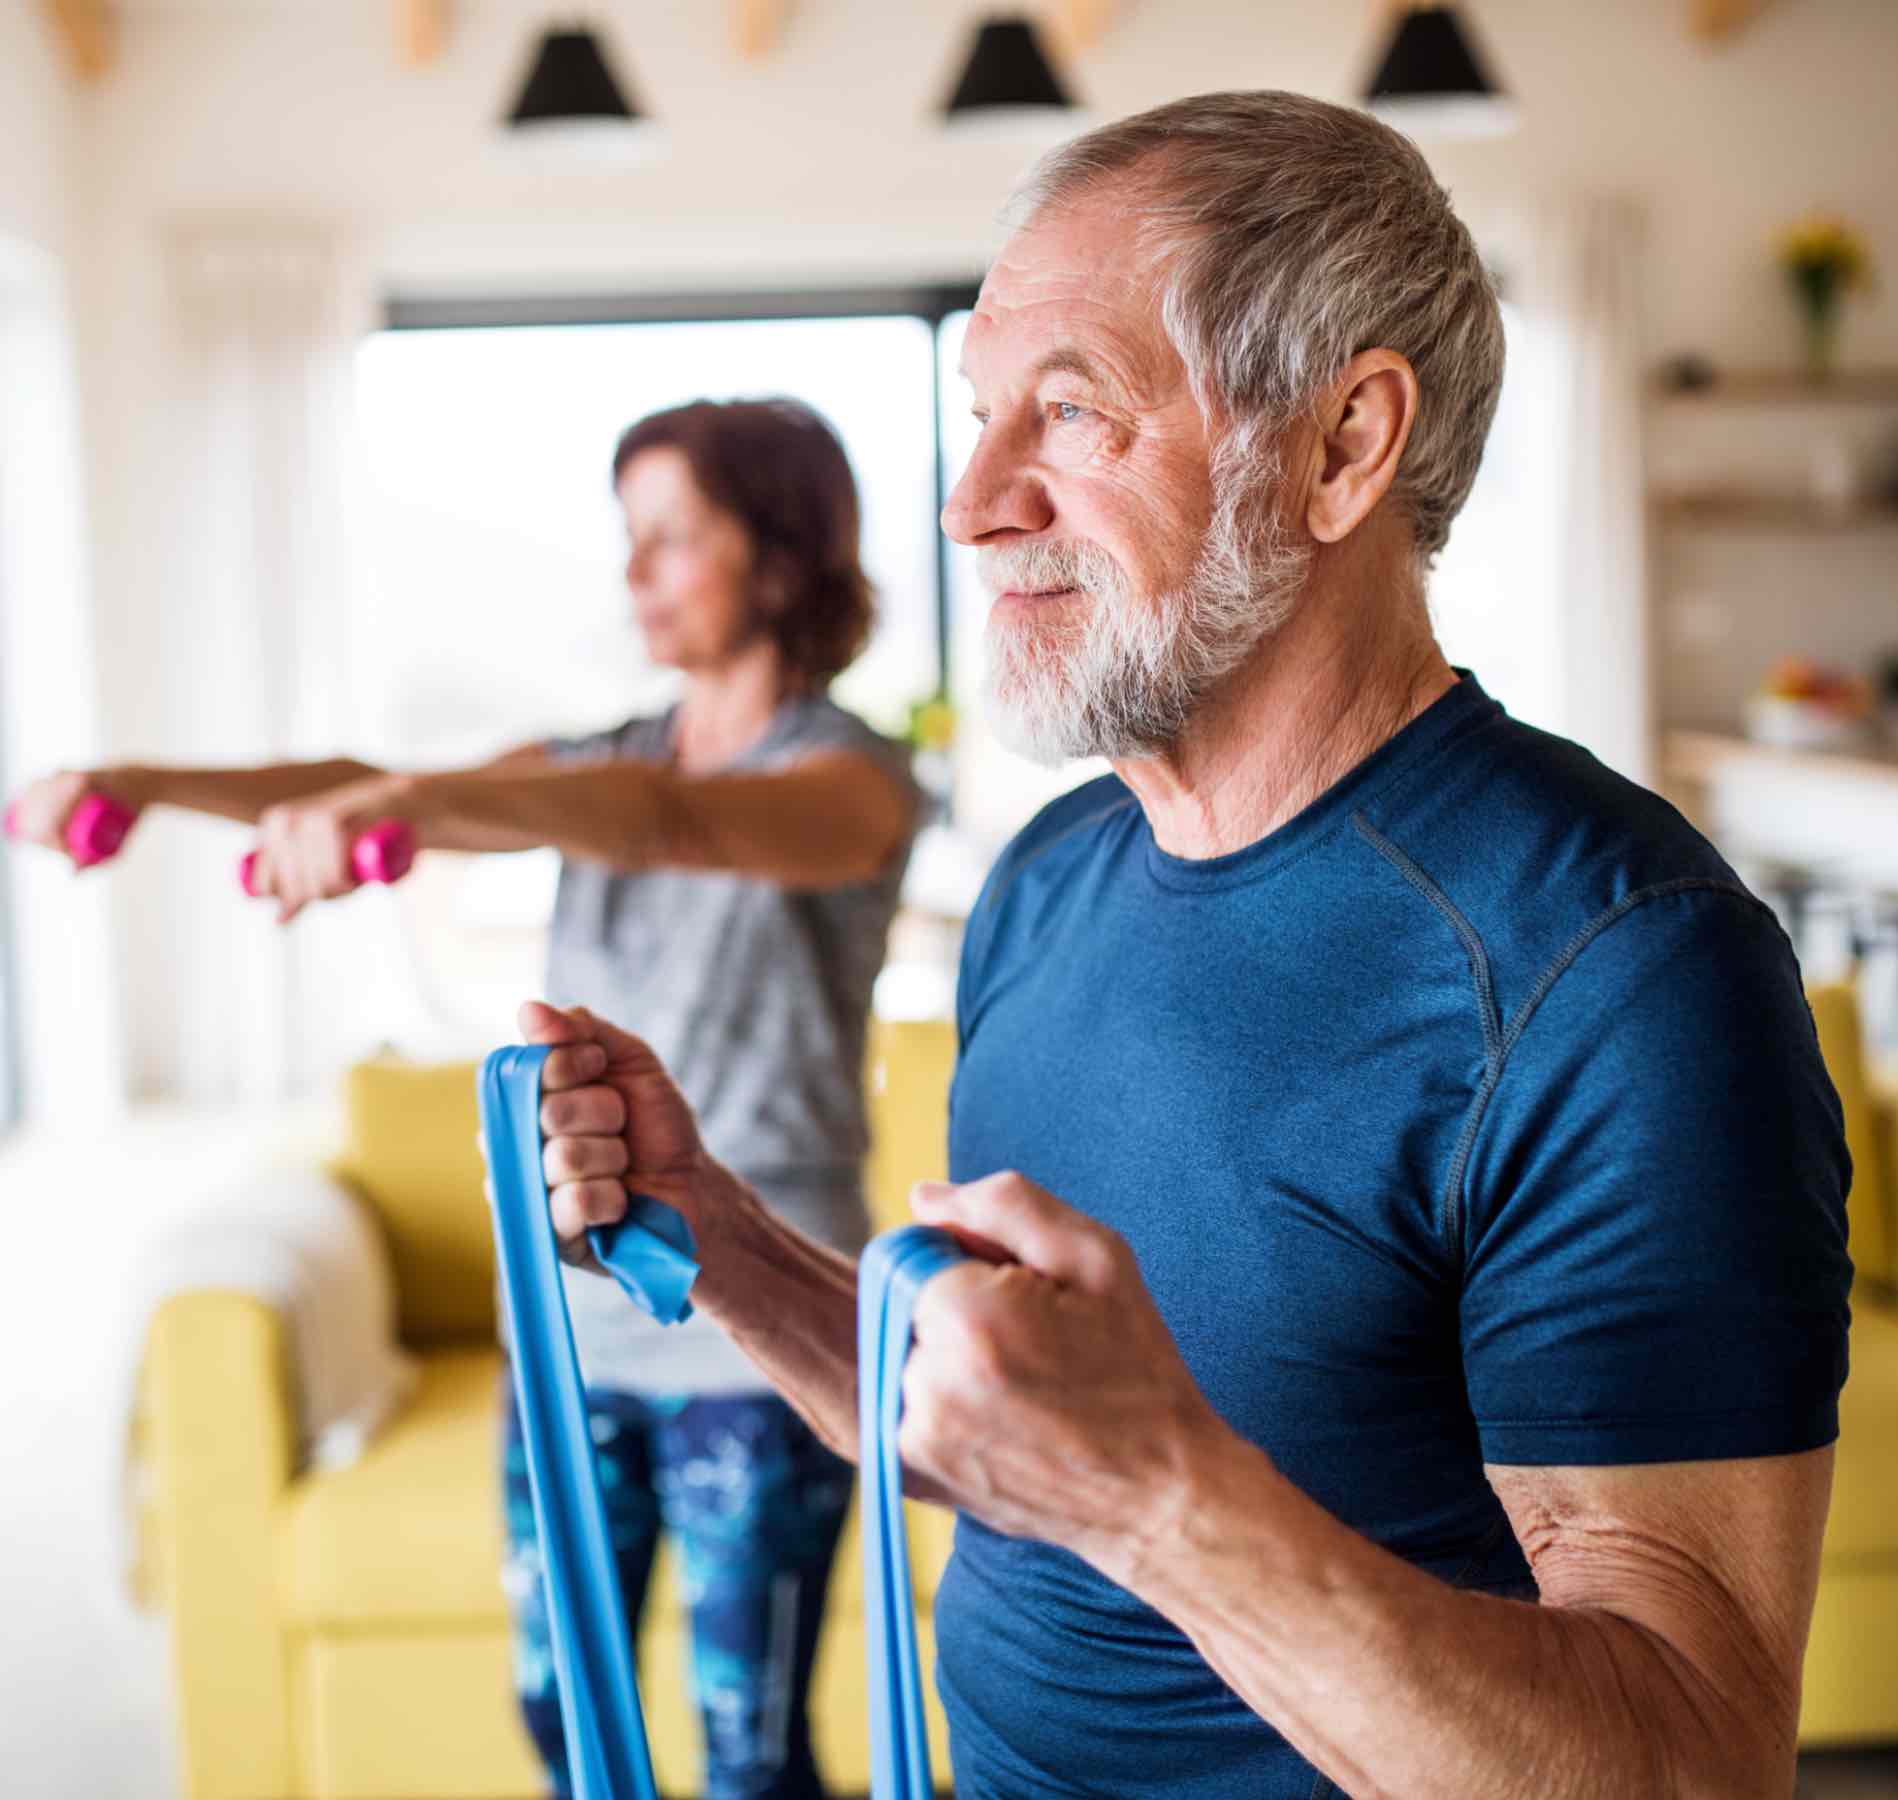 Chronic Care of Richmond suggests using exercise bands to help increase your strength and reduce your pain.